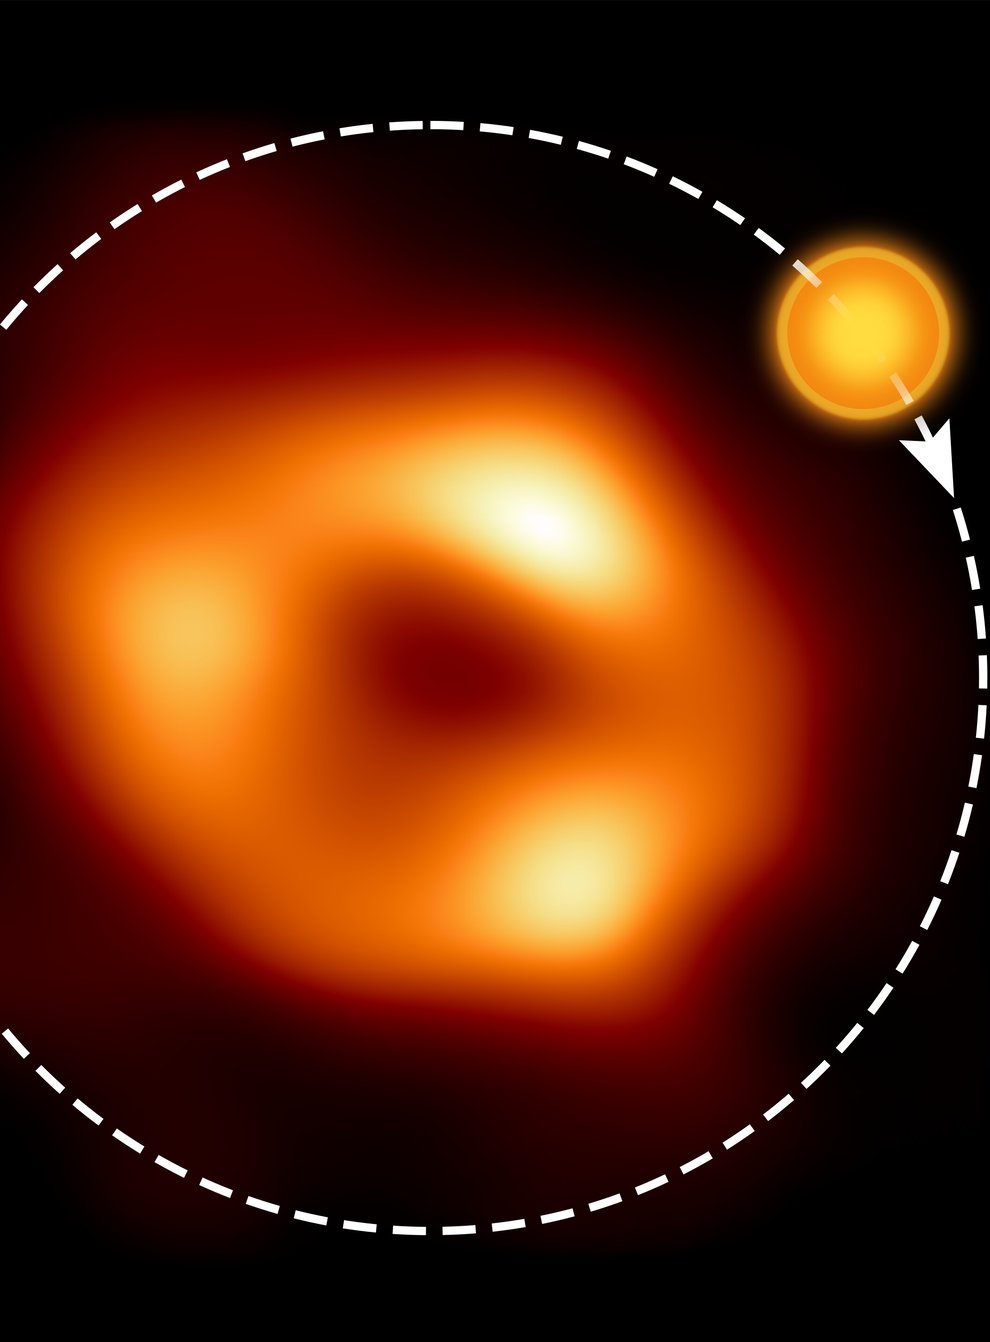 This shows a still image of the supermassive black hole Sagittarius A*, as seen by the Event Horizon Collaboration (EHT Collaboration/ESO/M Kornmesse)